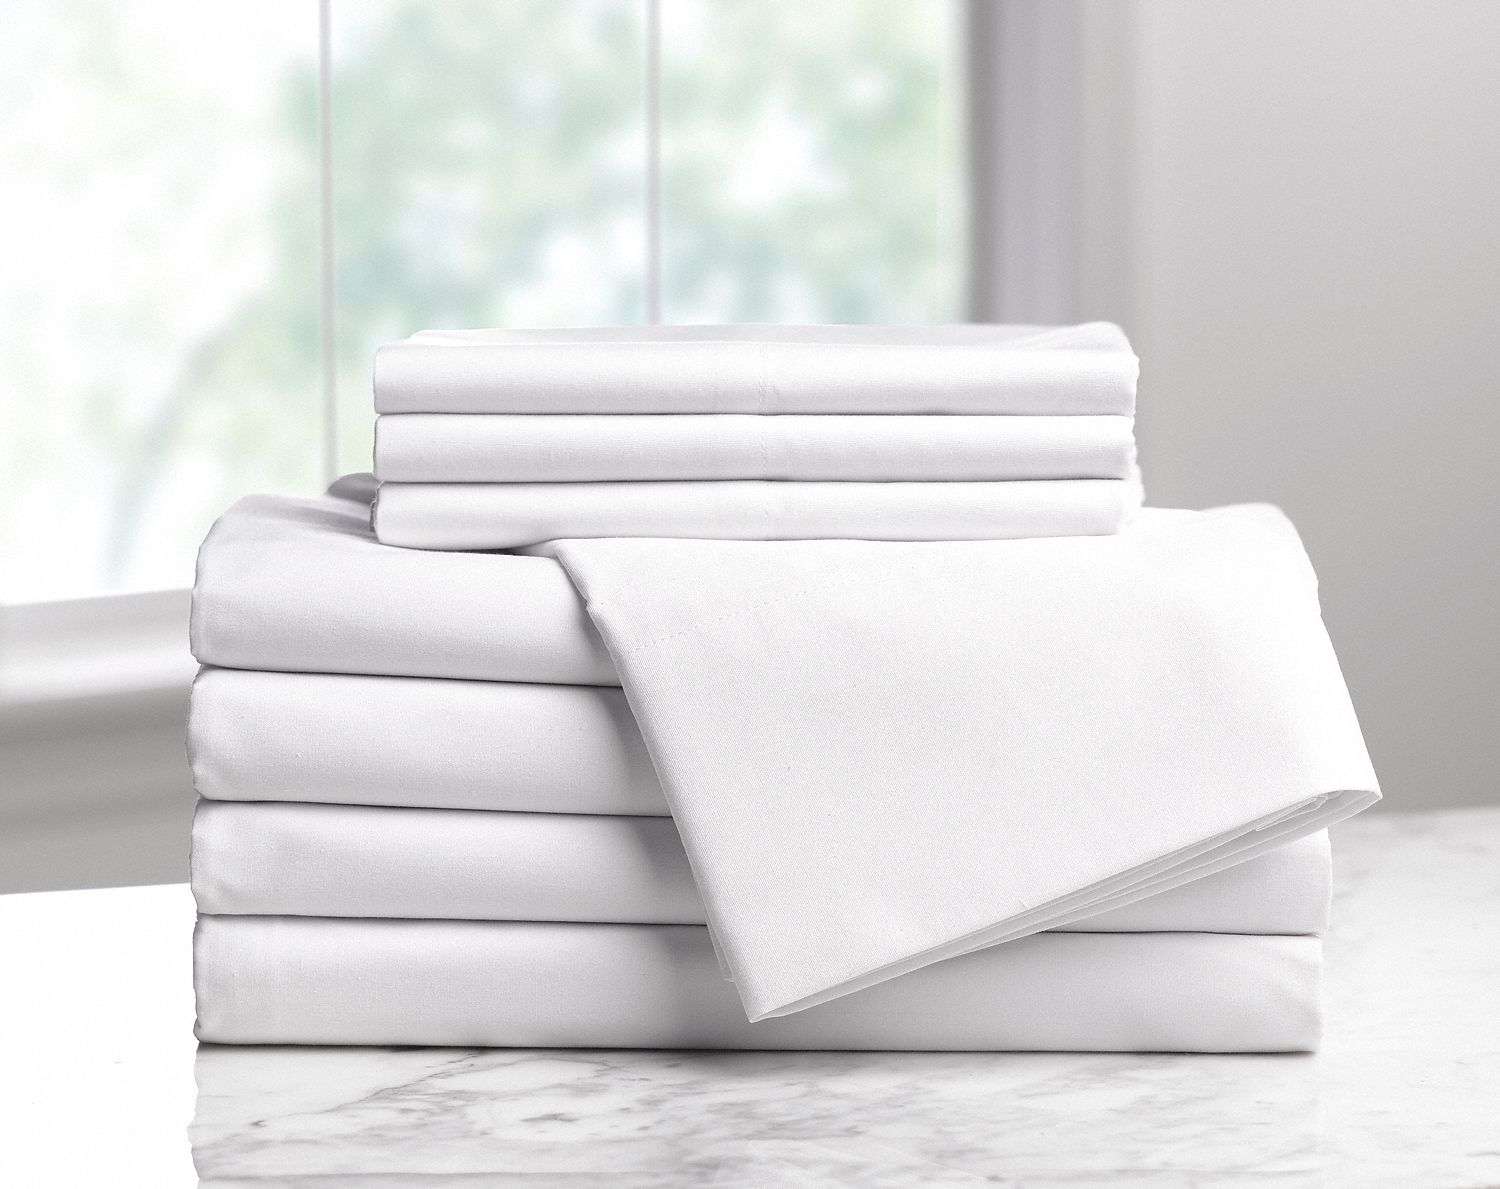 Flat Sheet: Flat, Twin, 69 in Wd, 110 in Lg, 60% Cotton/40% Polyester Fabric, T200, 6 PK